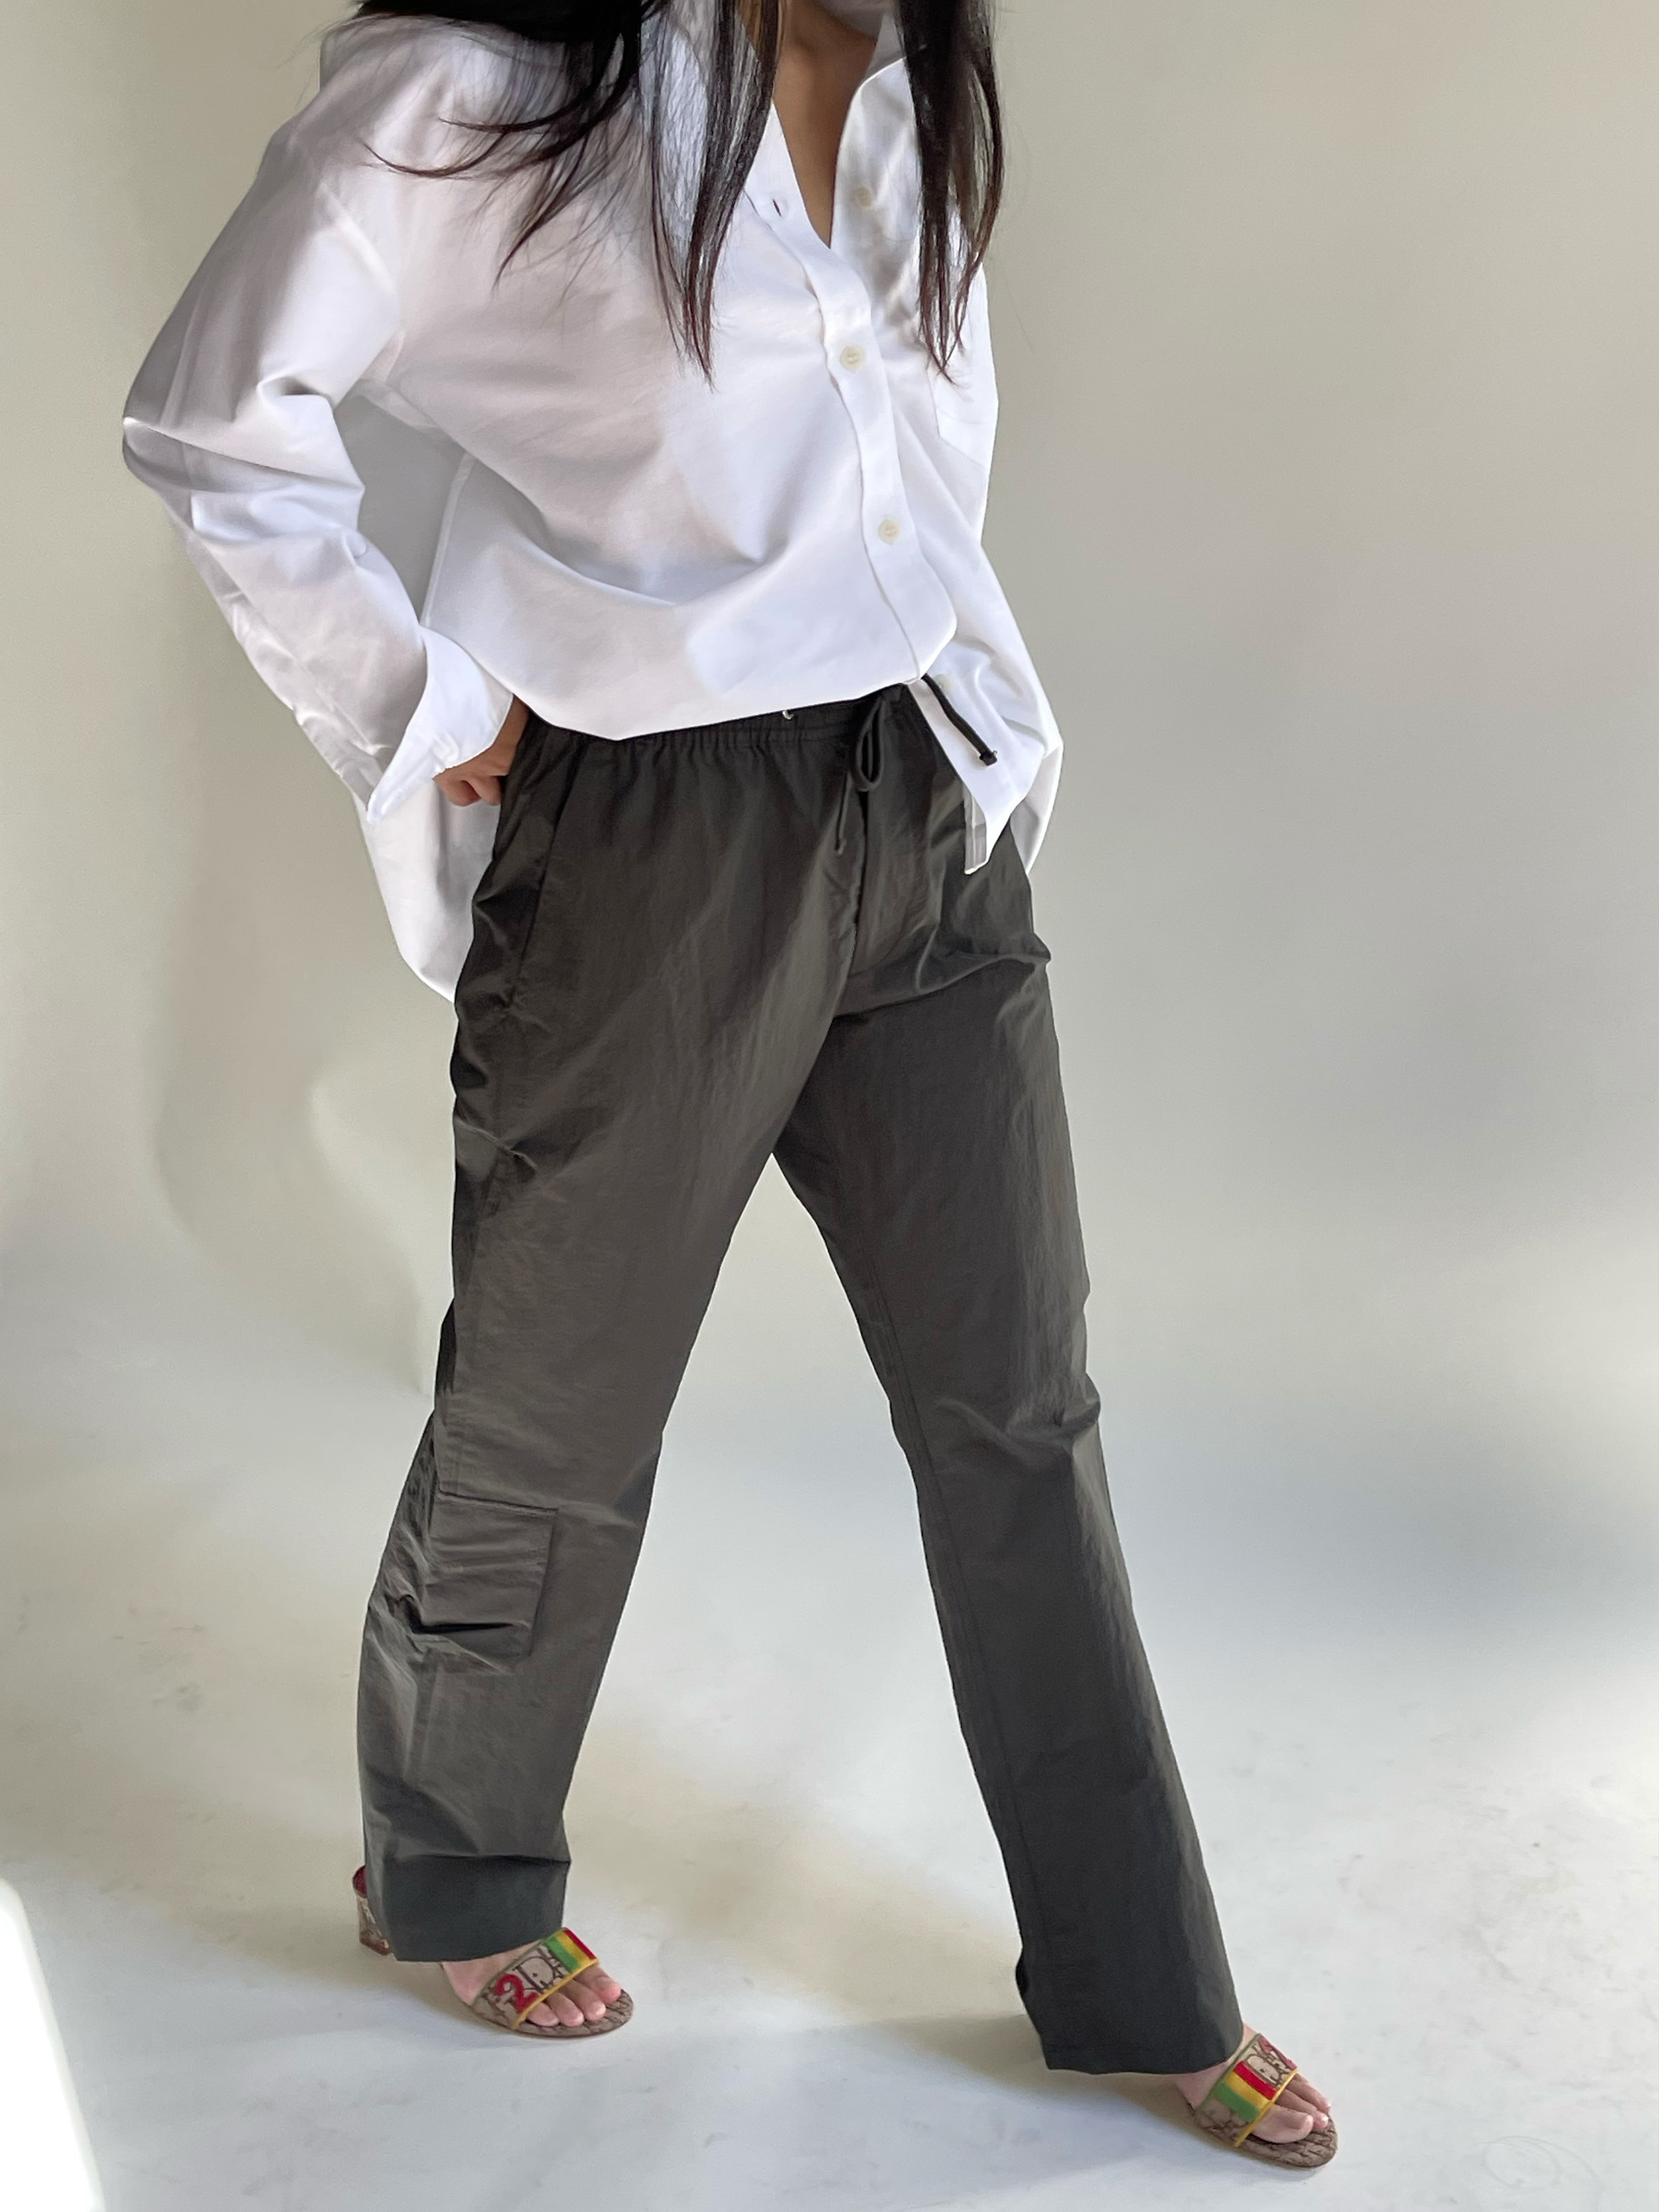 LARP Basic Outfit - 3 Pieces: Blue & Grey Shirt, Pants and Sash | From  £185.00